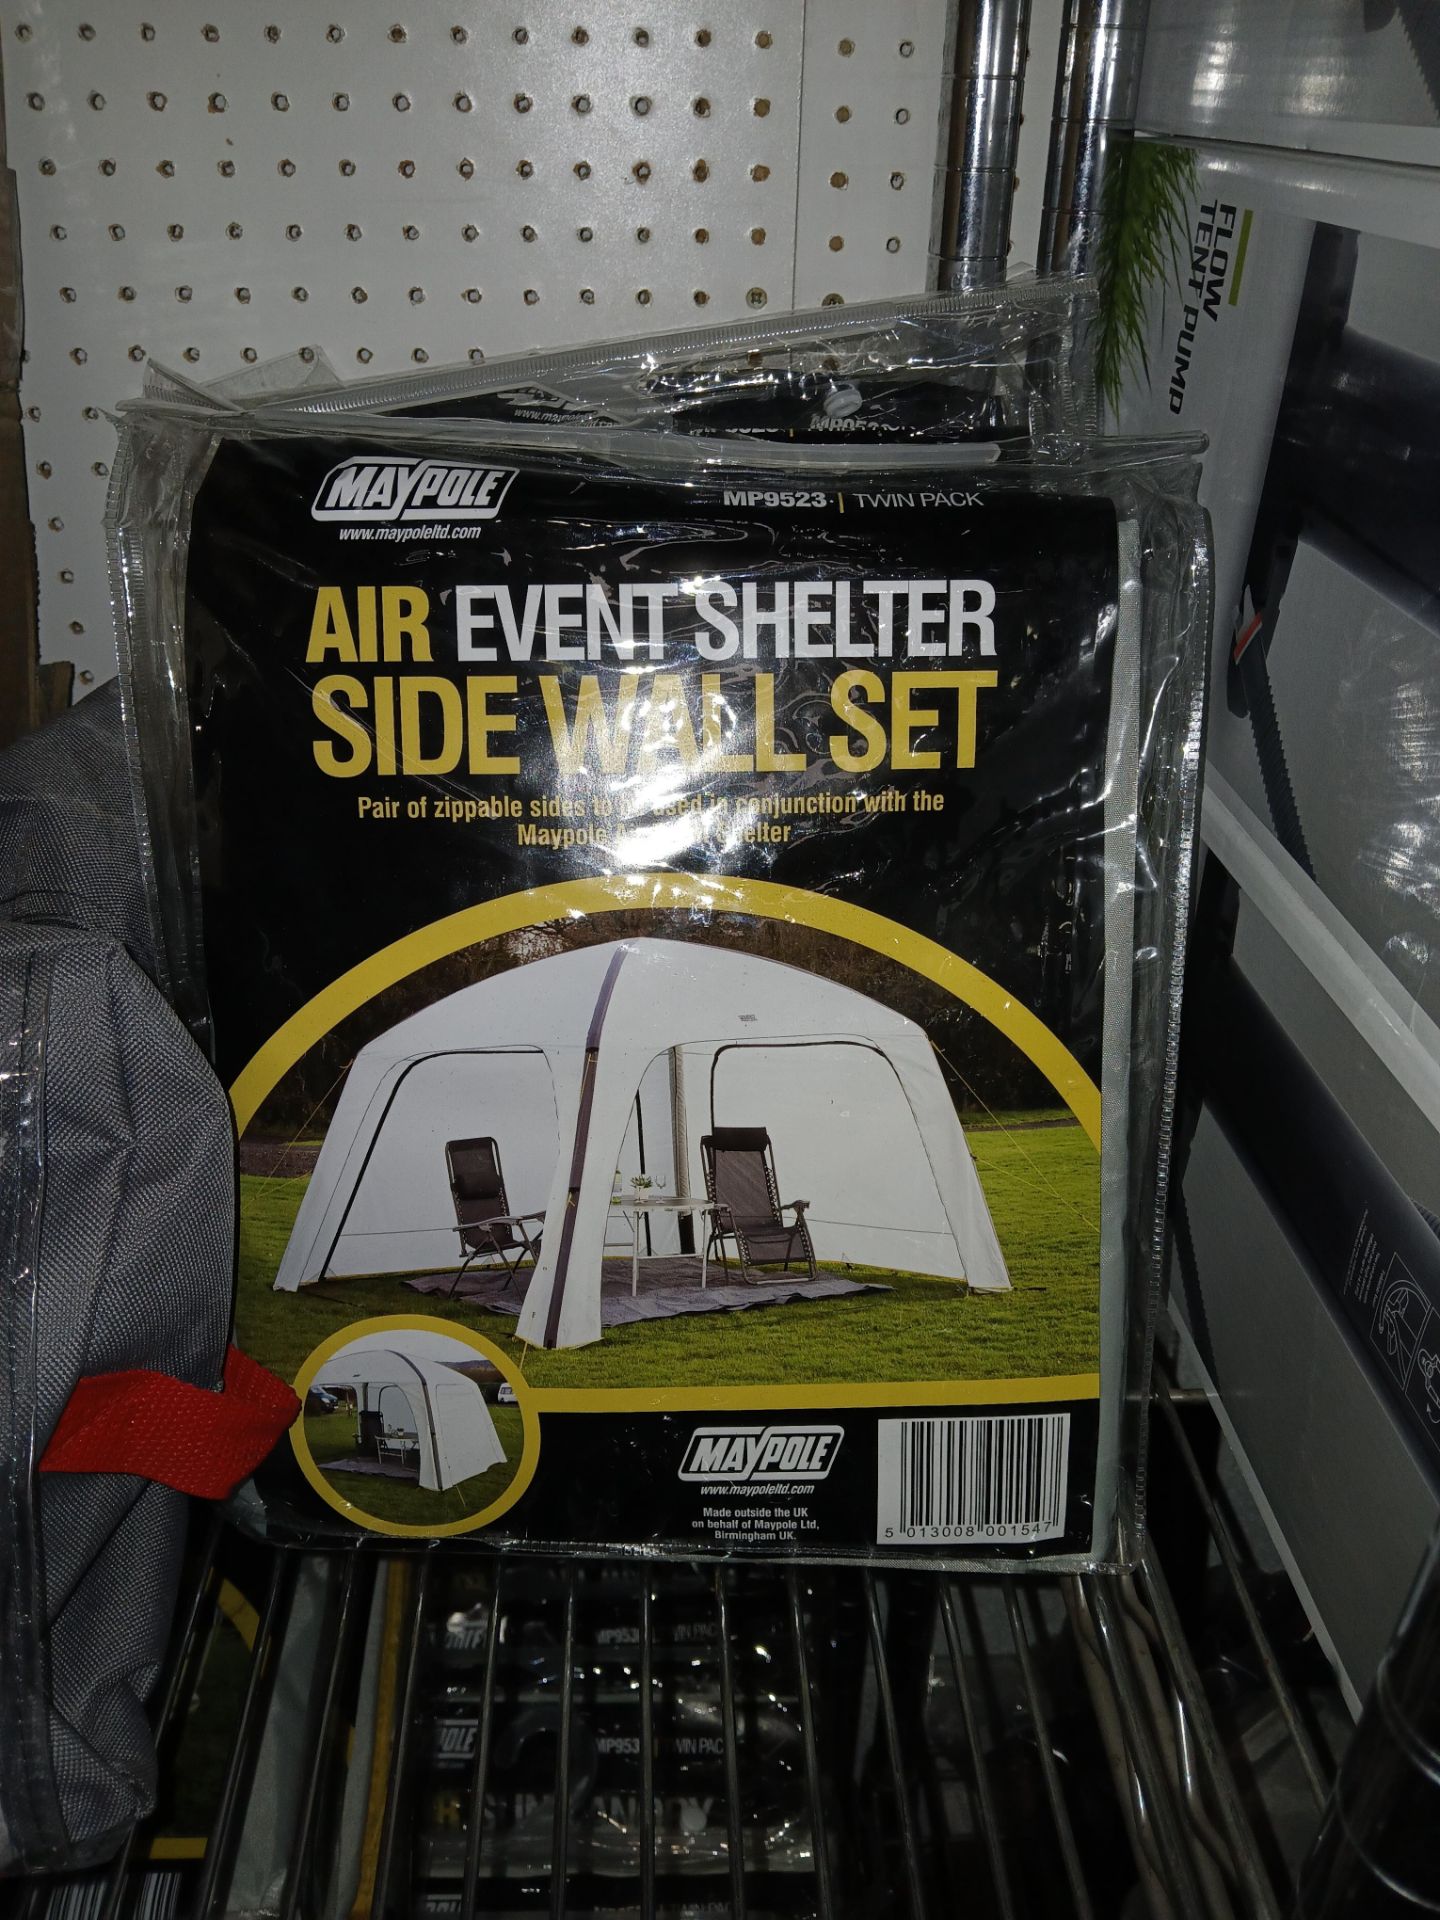 An assortment of Event Shelters to shelf to include Maypole Air Event Shelter Side Wall Set and - Bild 2 aus 3